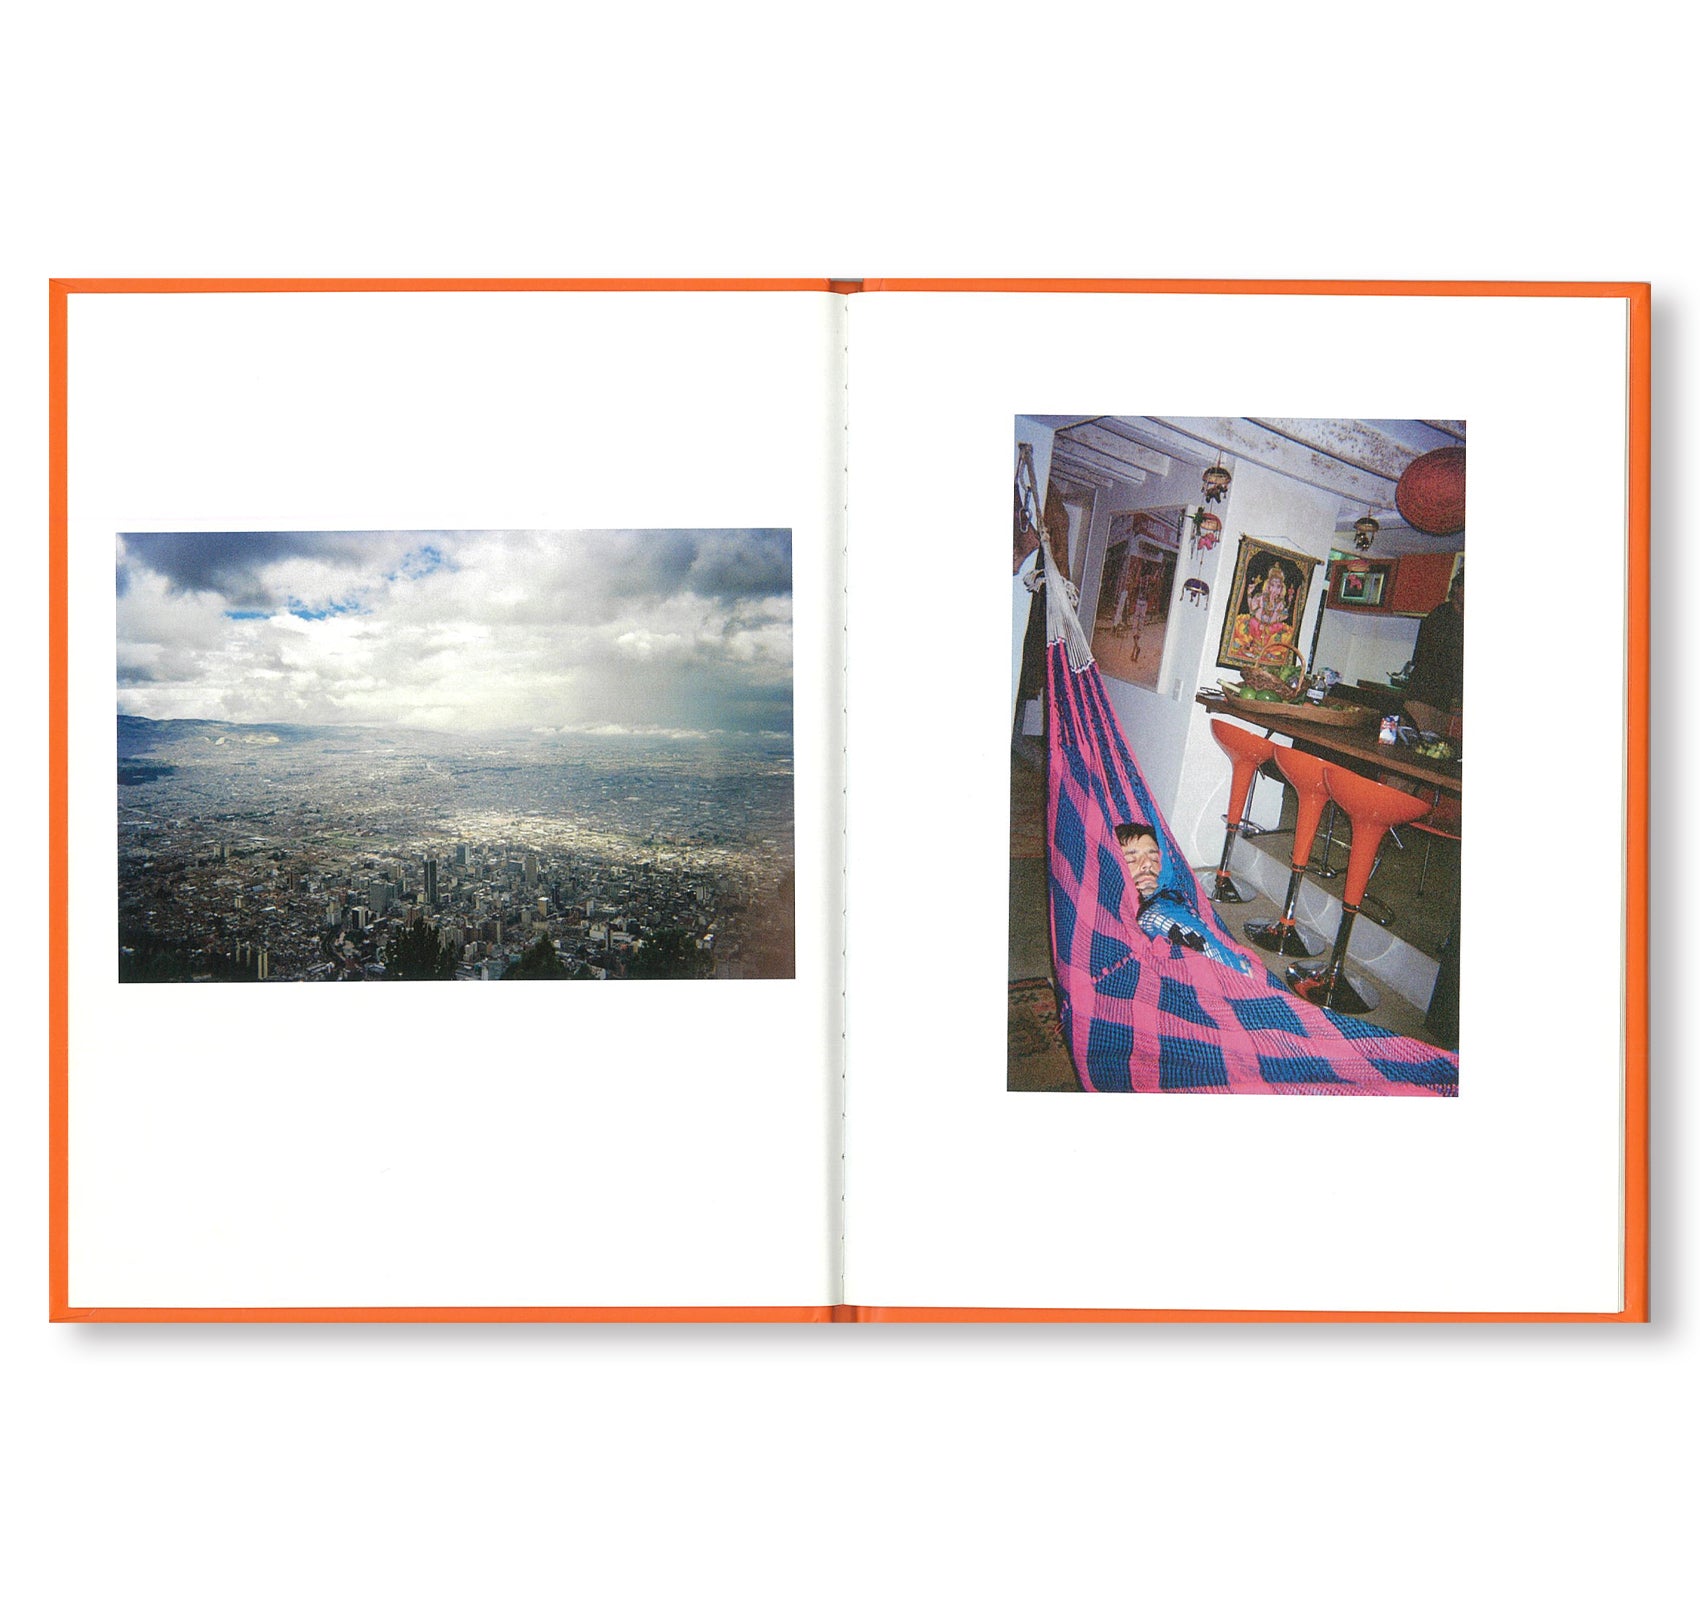 ONE PICTURE BOOK #88: BOGOTÁ FUNSAVER by Alec Soth